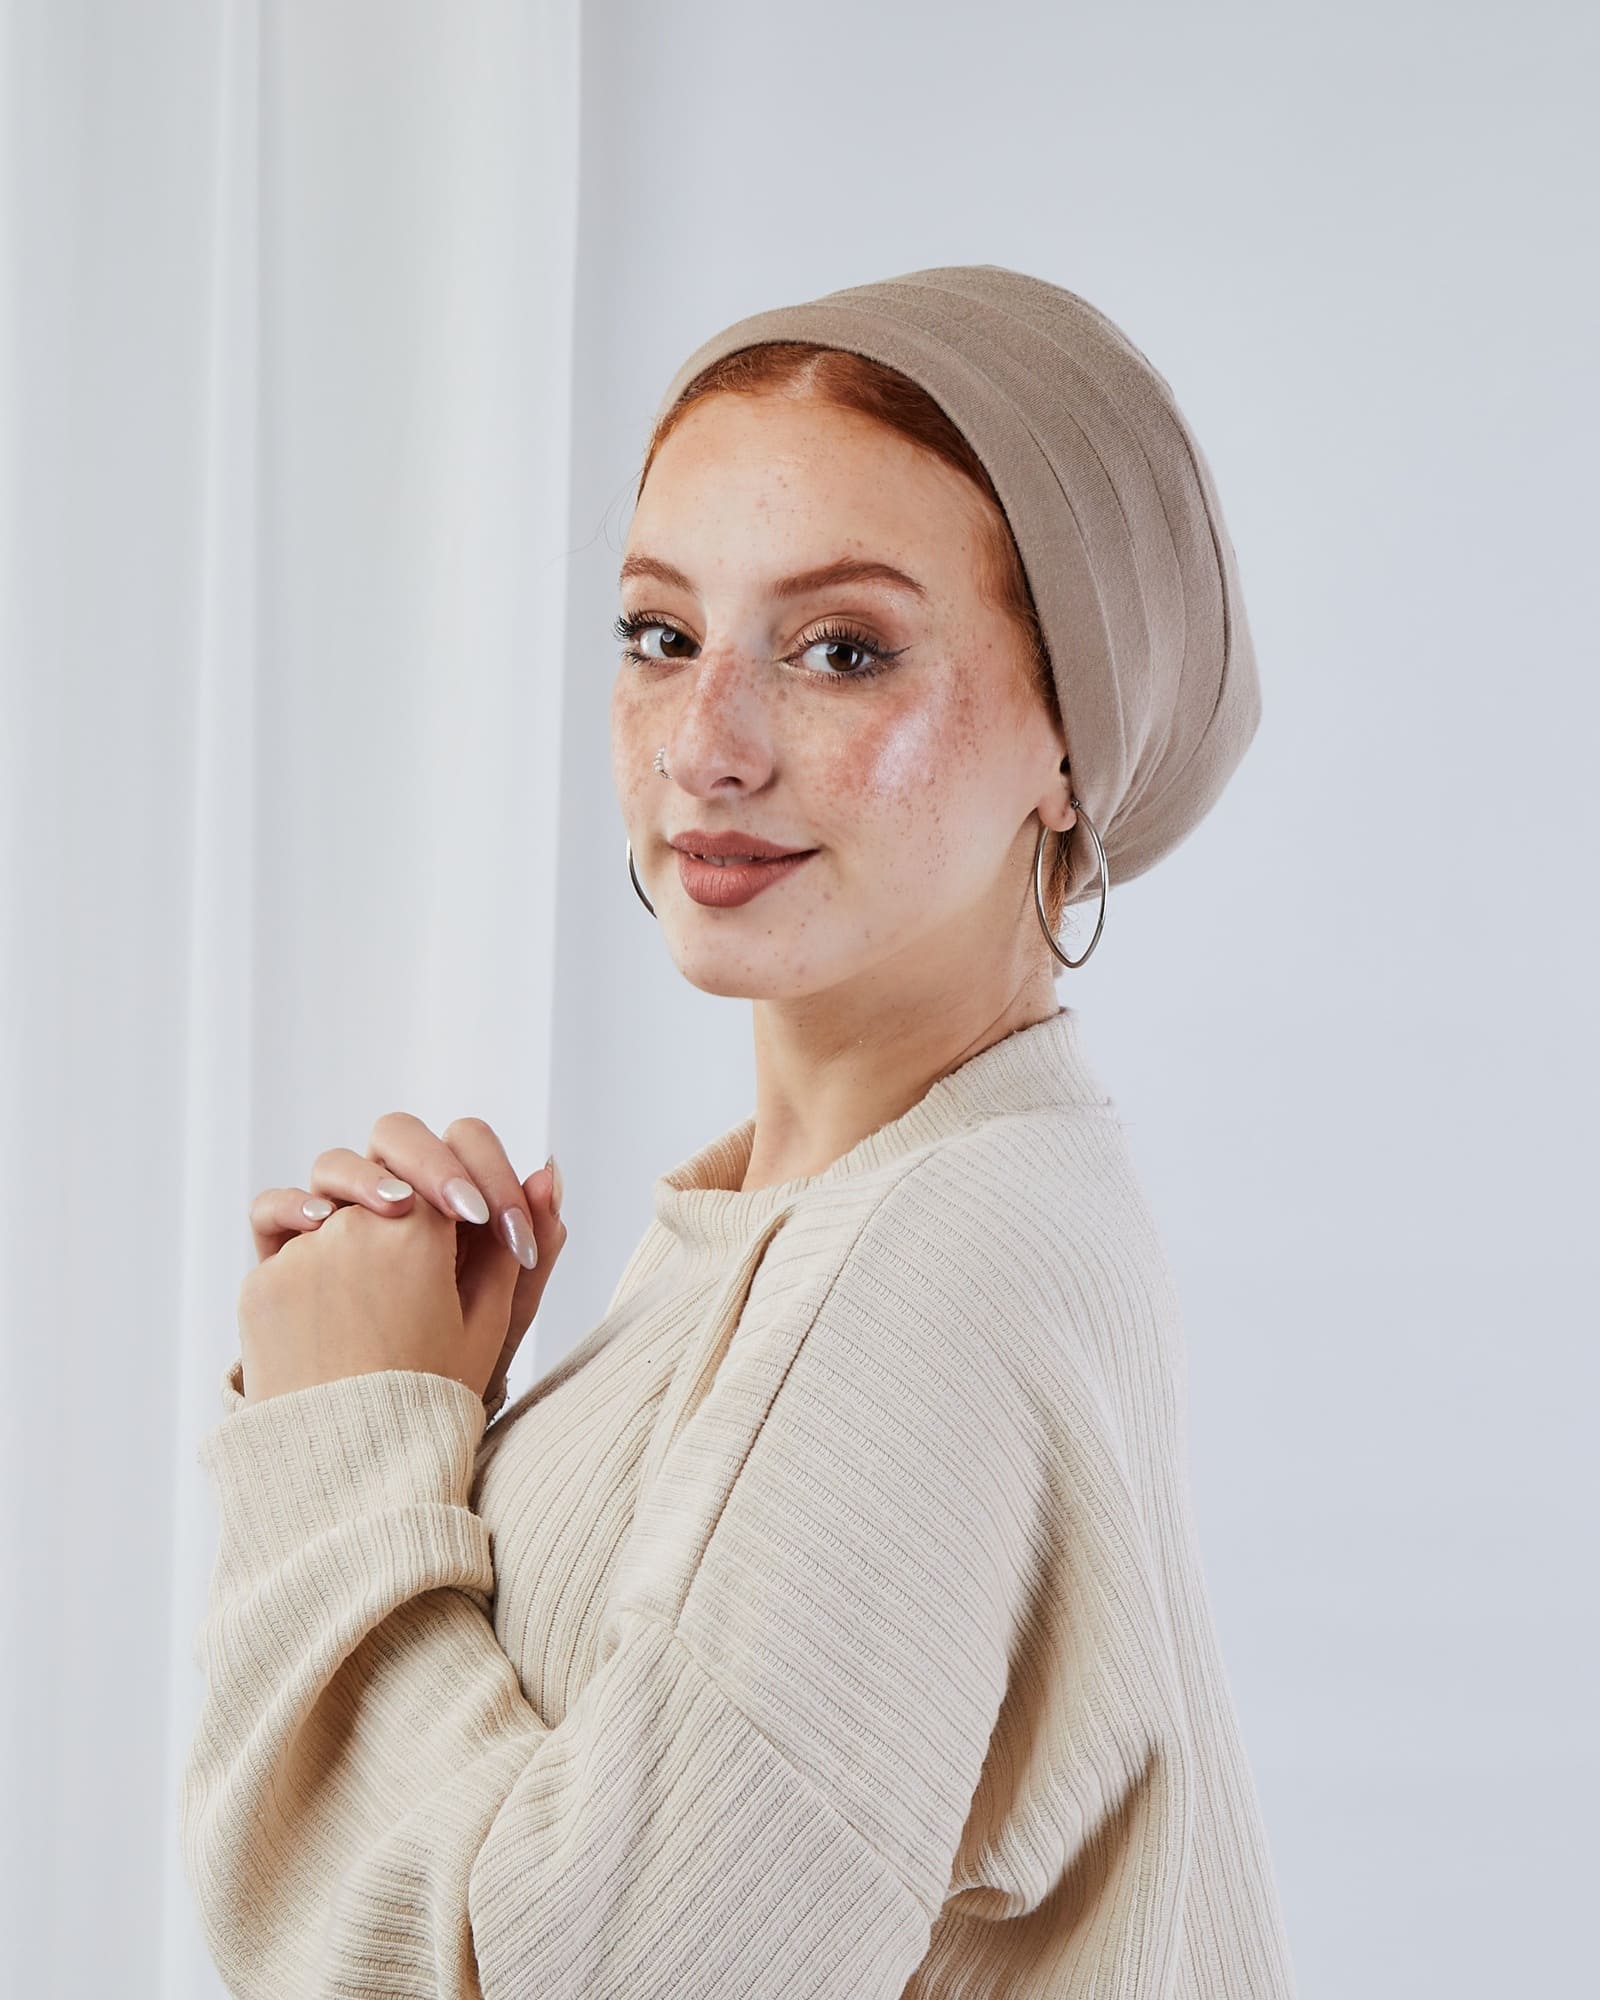 Knotted Cotton Turban